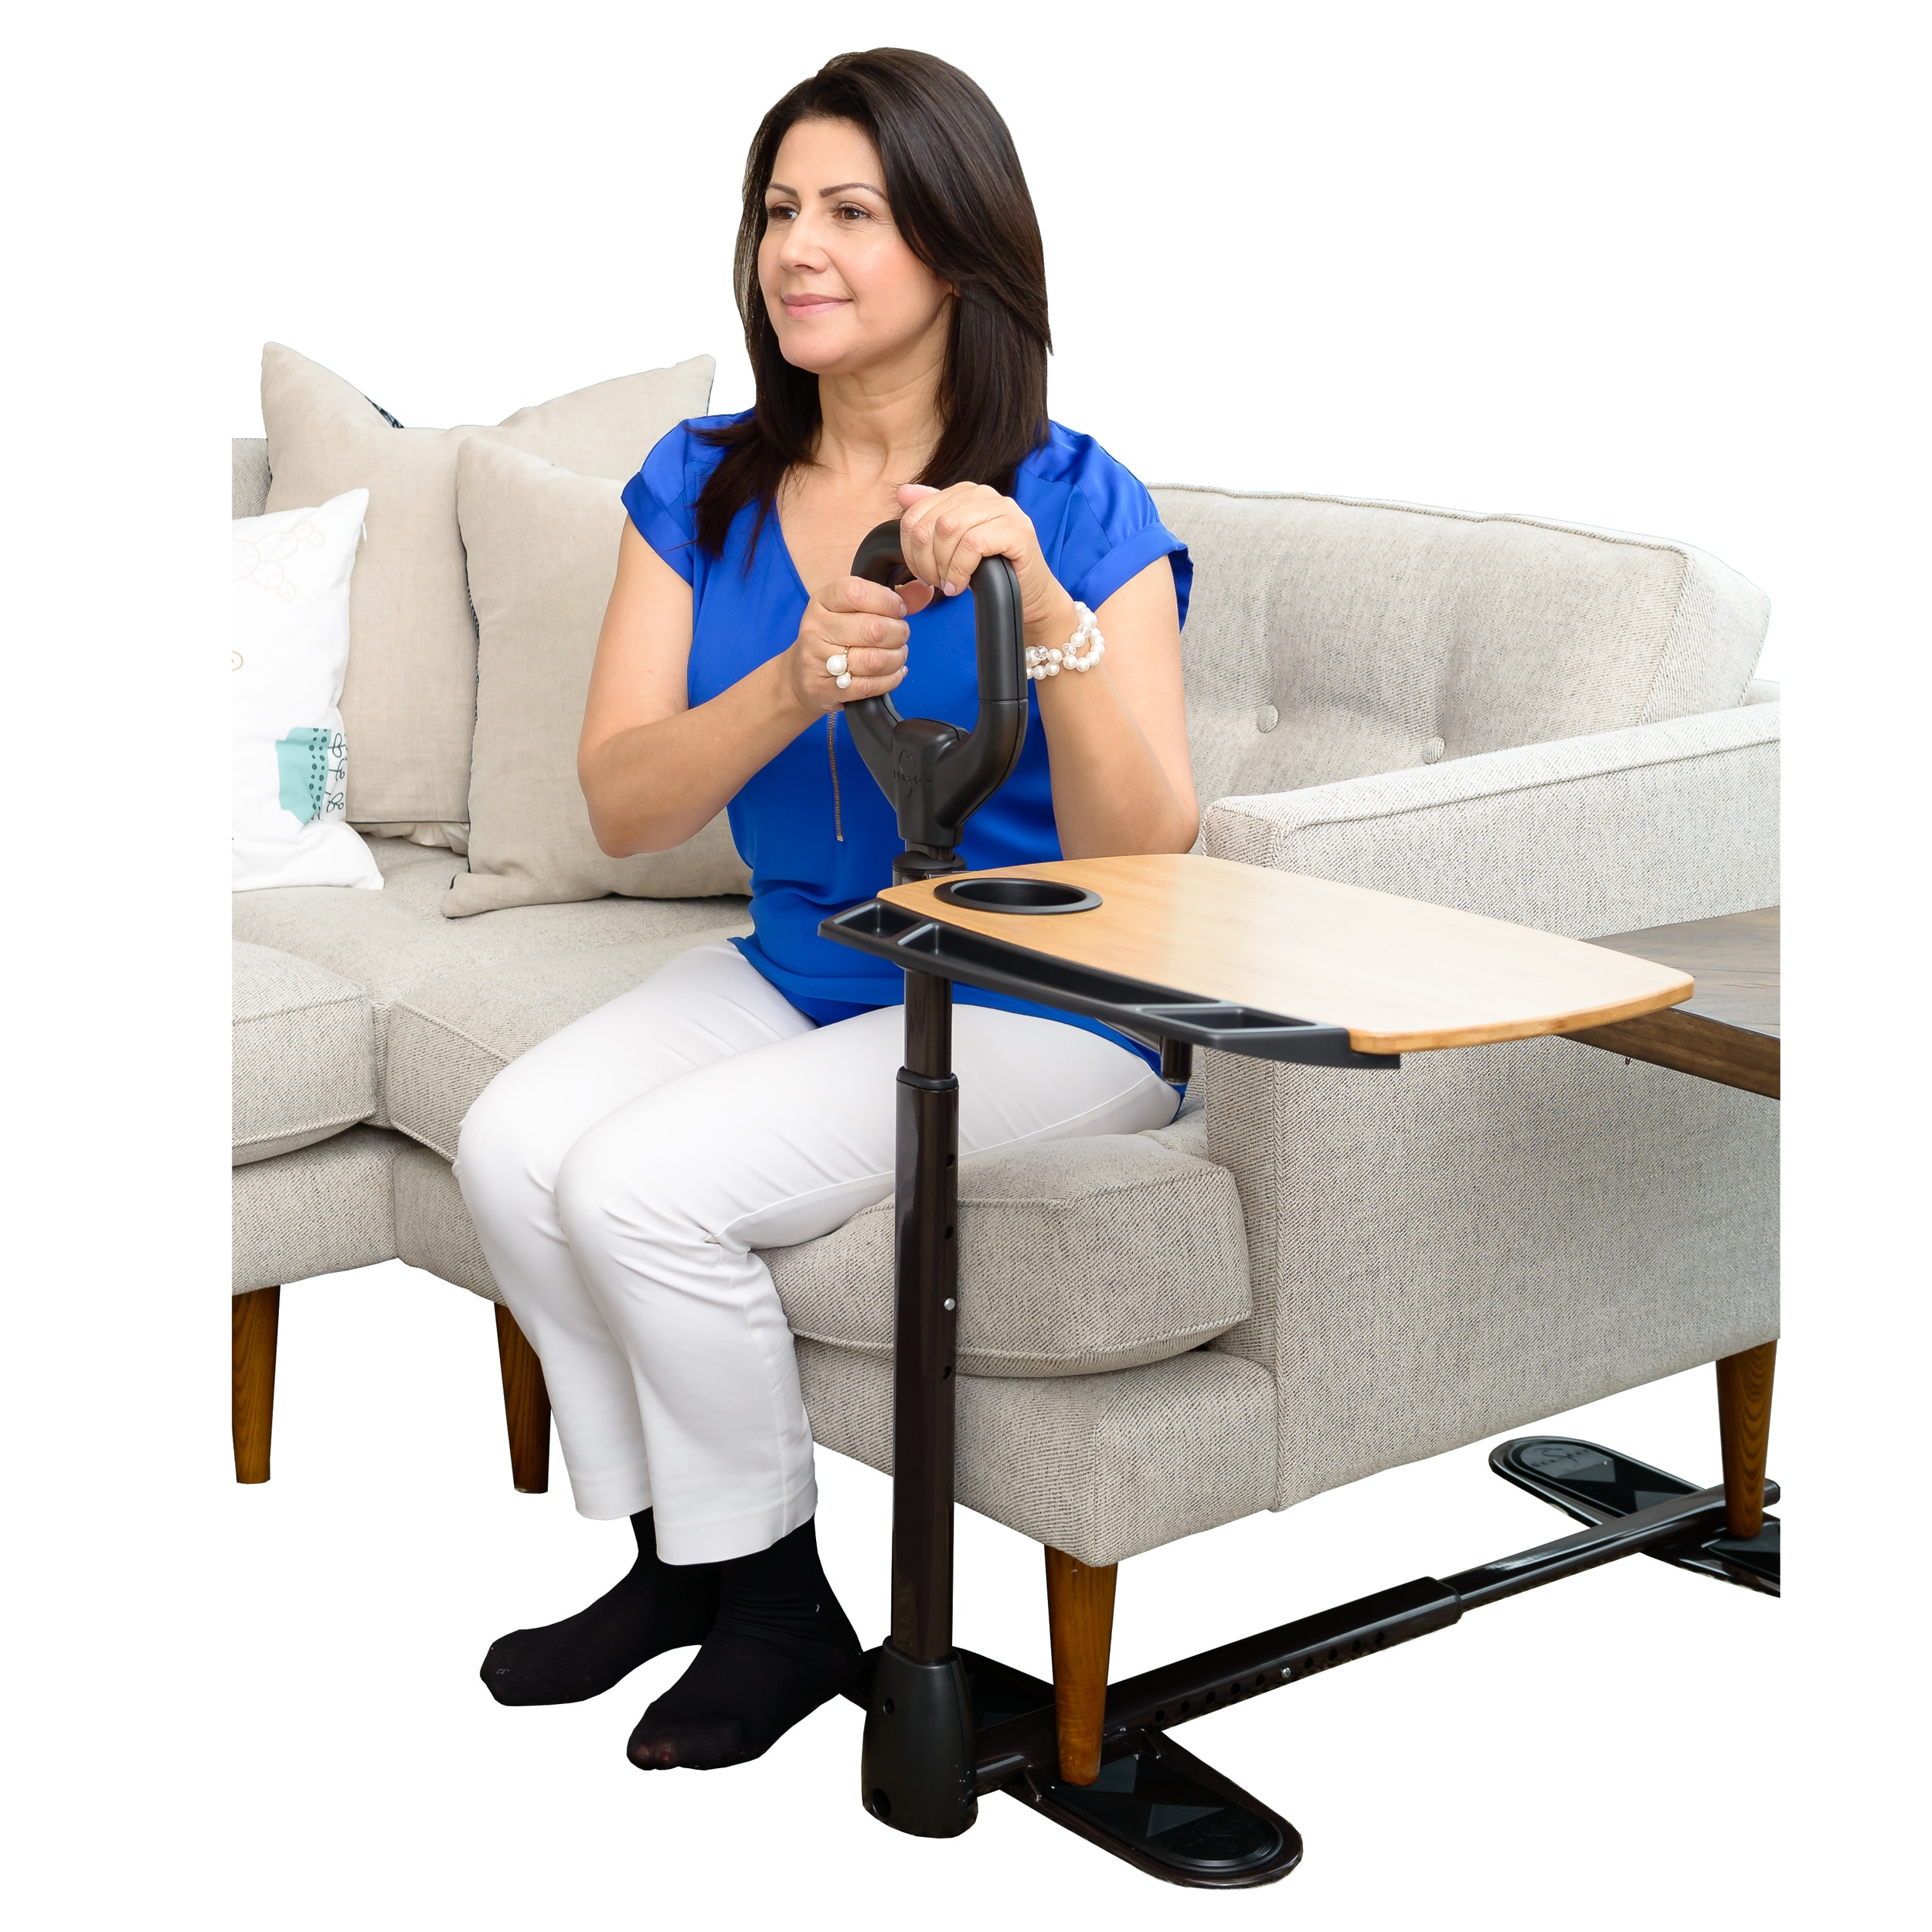 Couch Cane Swivel Tray by Standers : accessory table for the Couch Cane